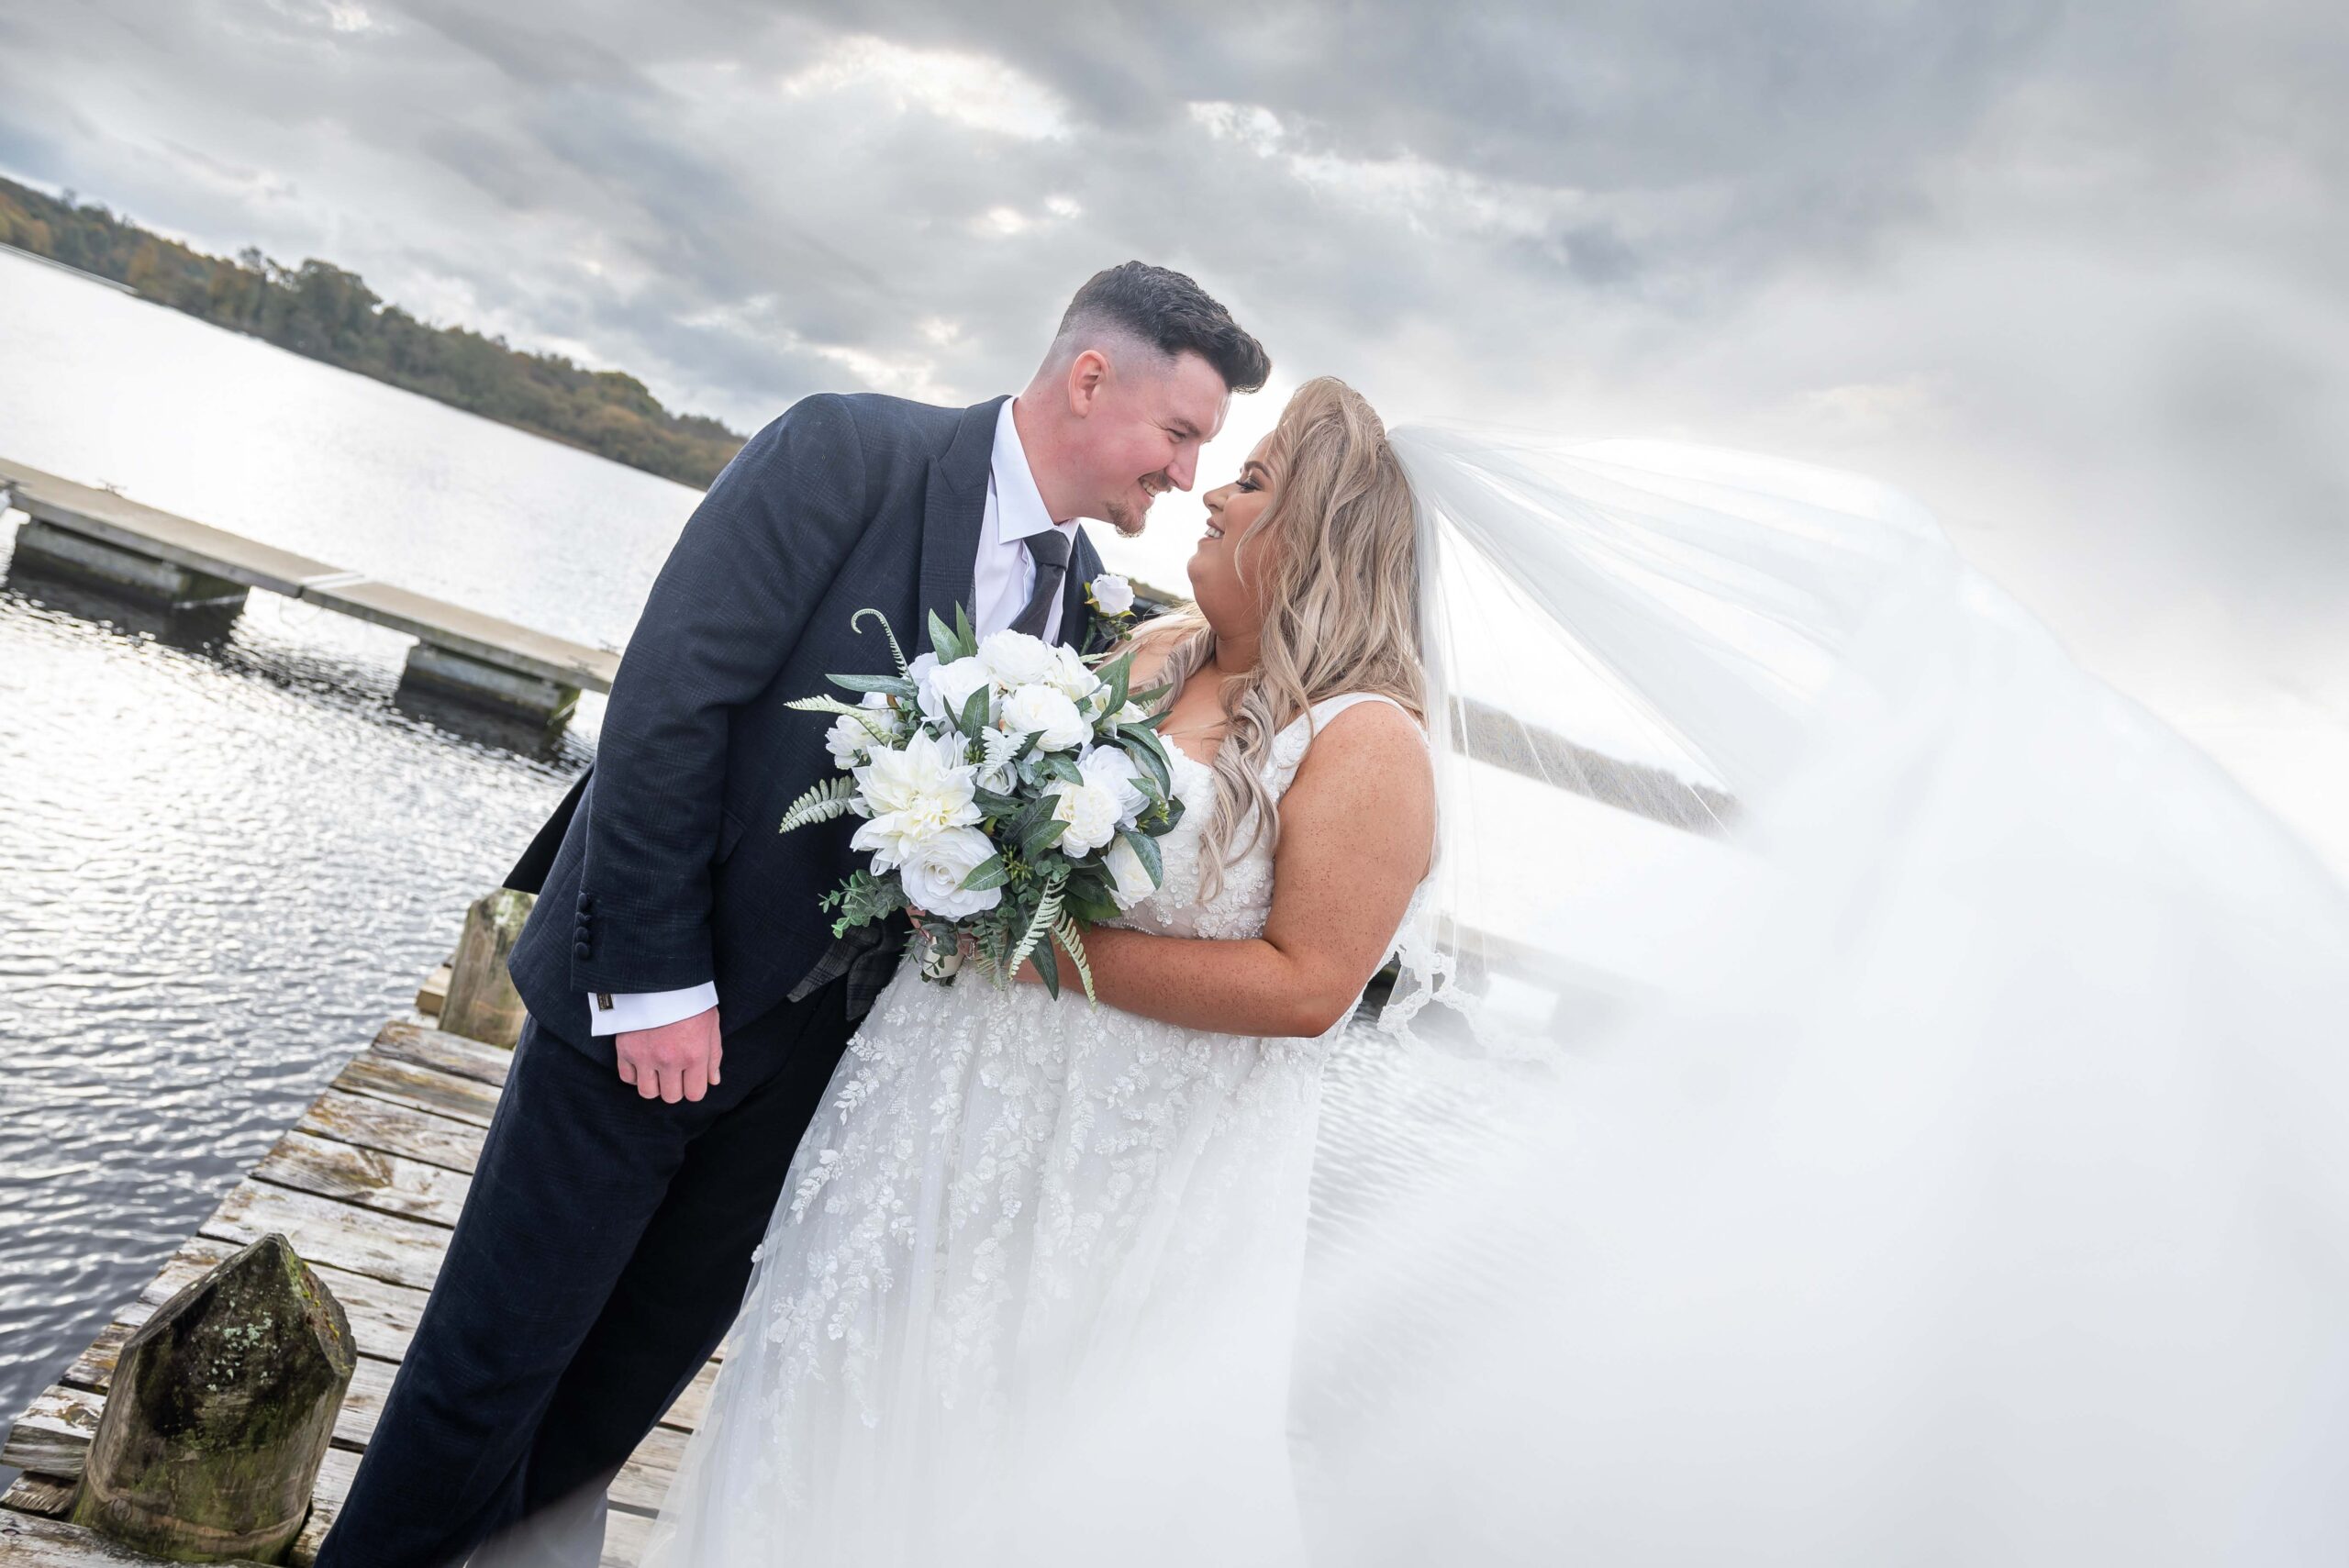 candid weddings best photographer northern ireland affordable